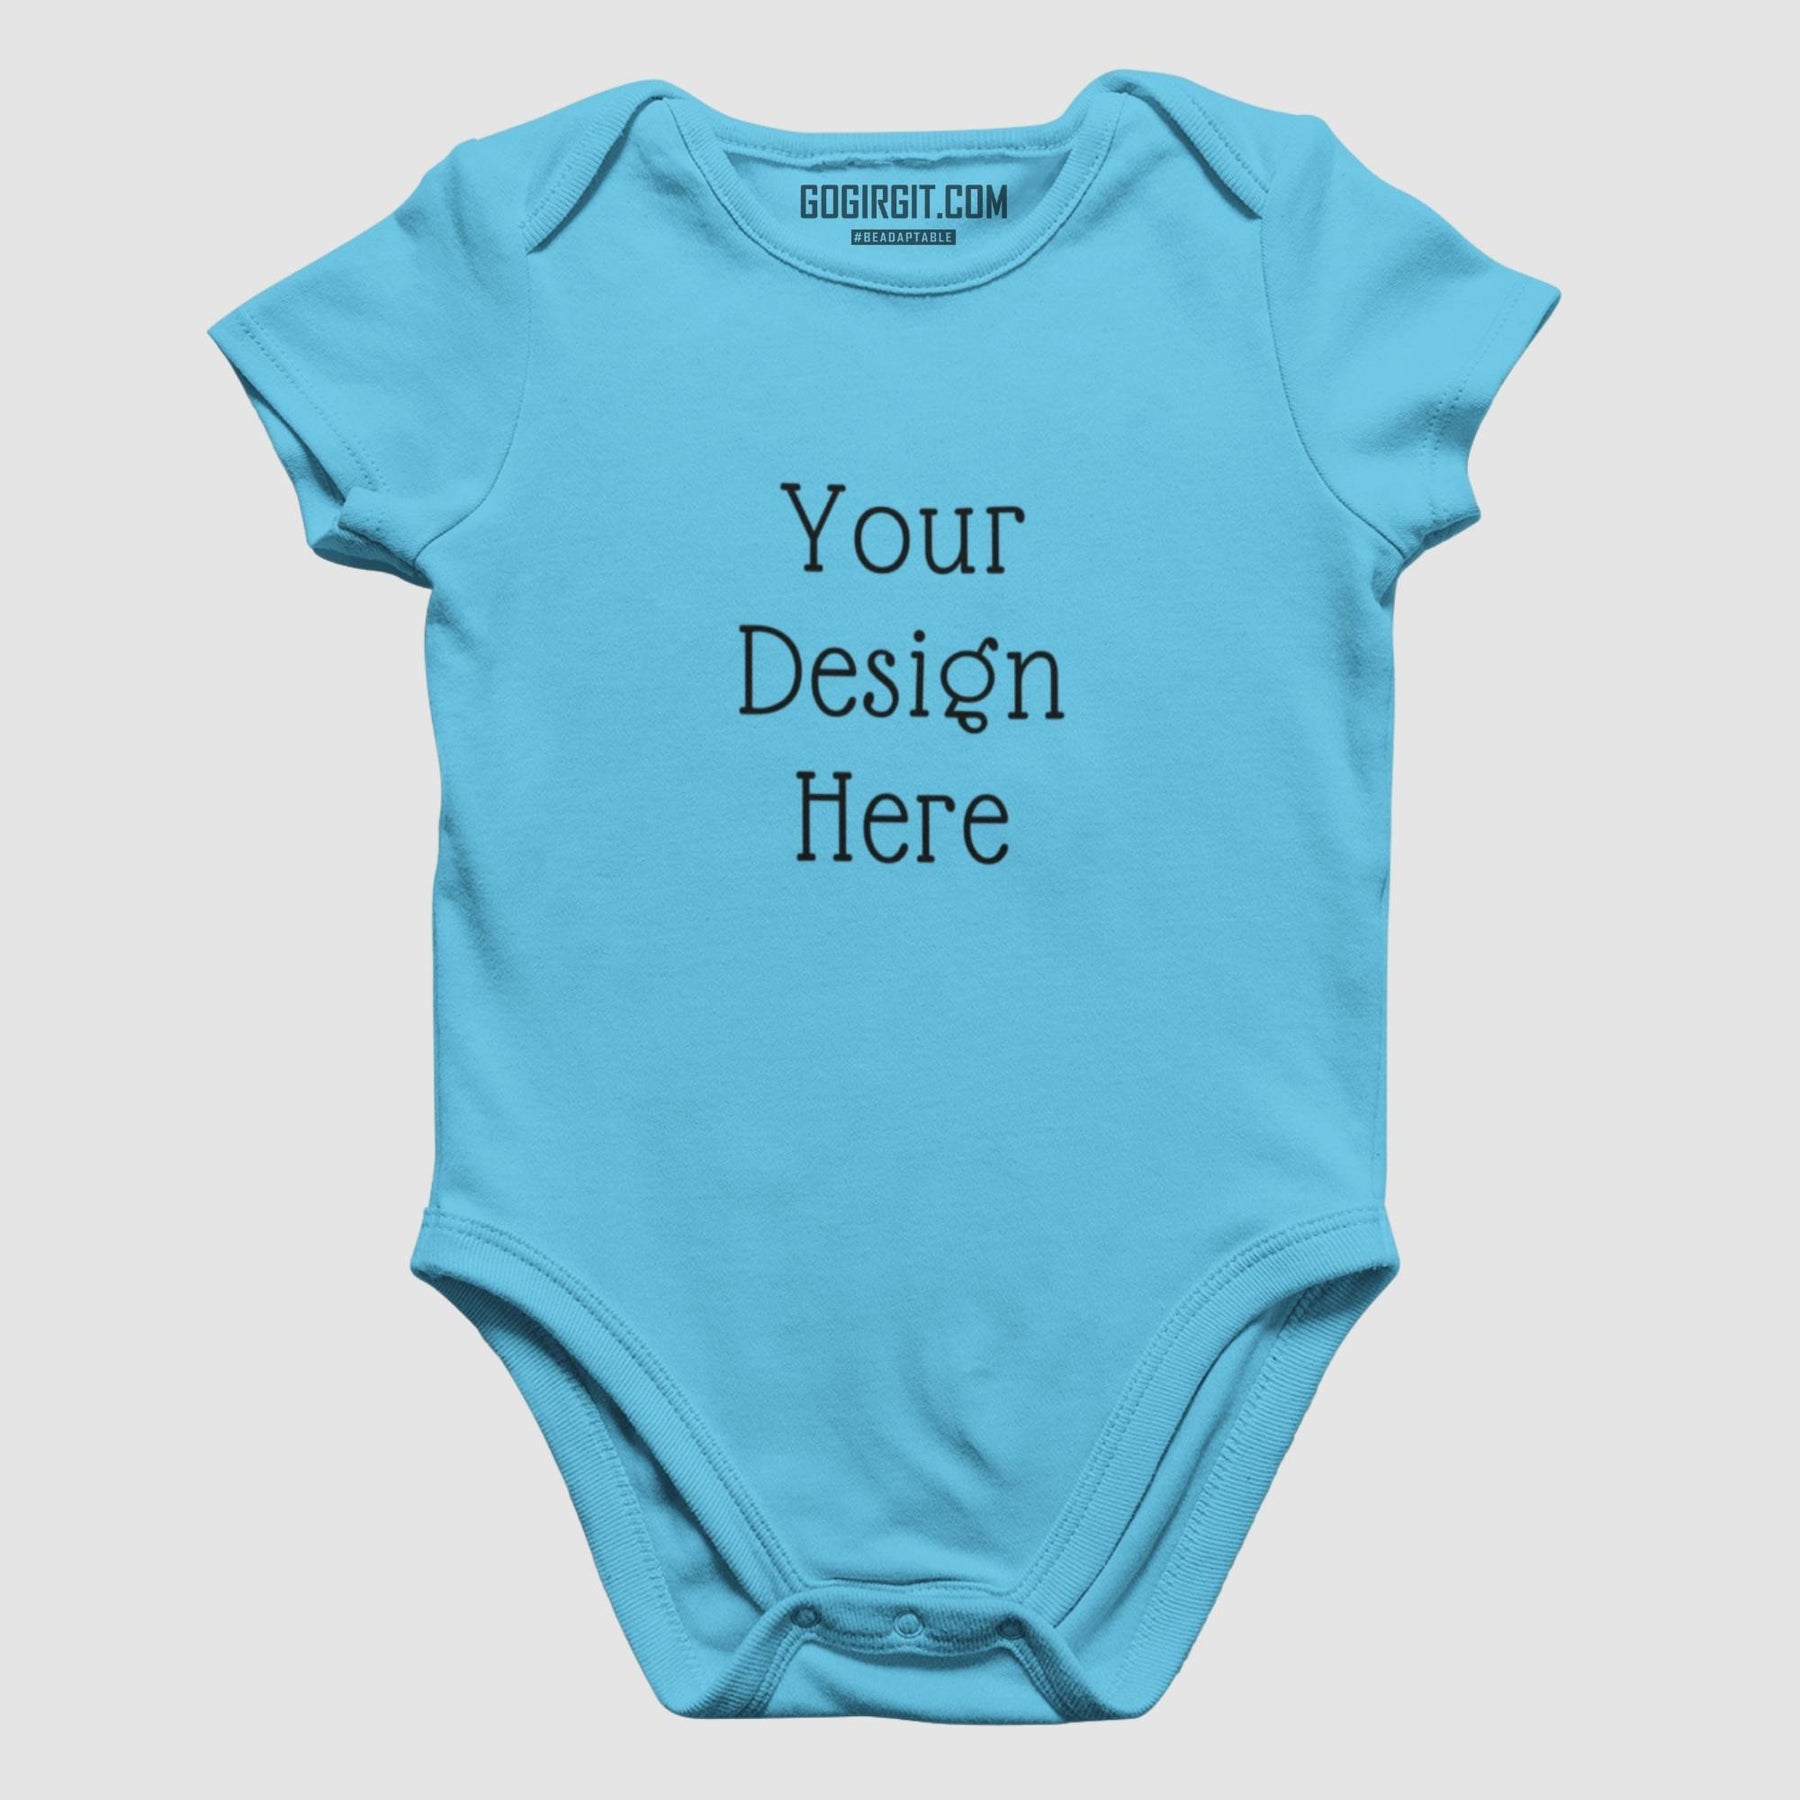 cotton-rompers-for-kids-also-called-onesie-personalised-and-customized-color-sky-blue-gogirgit